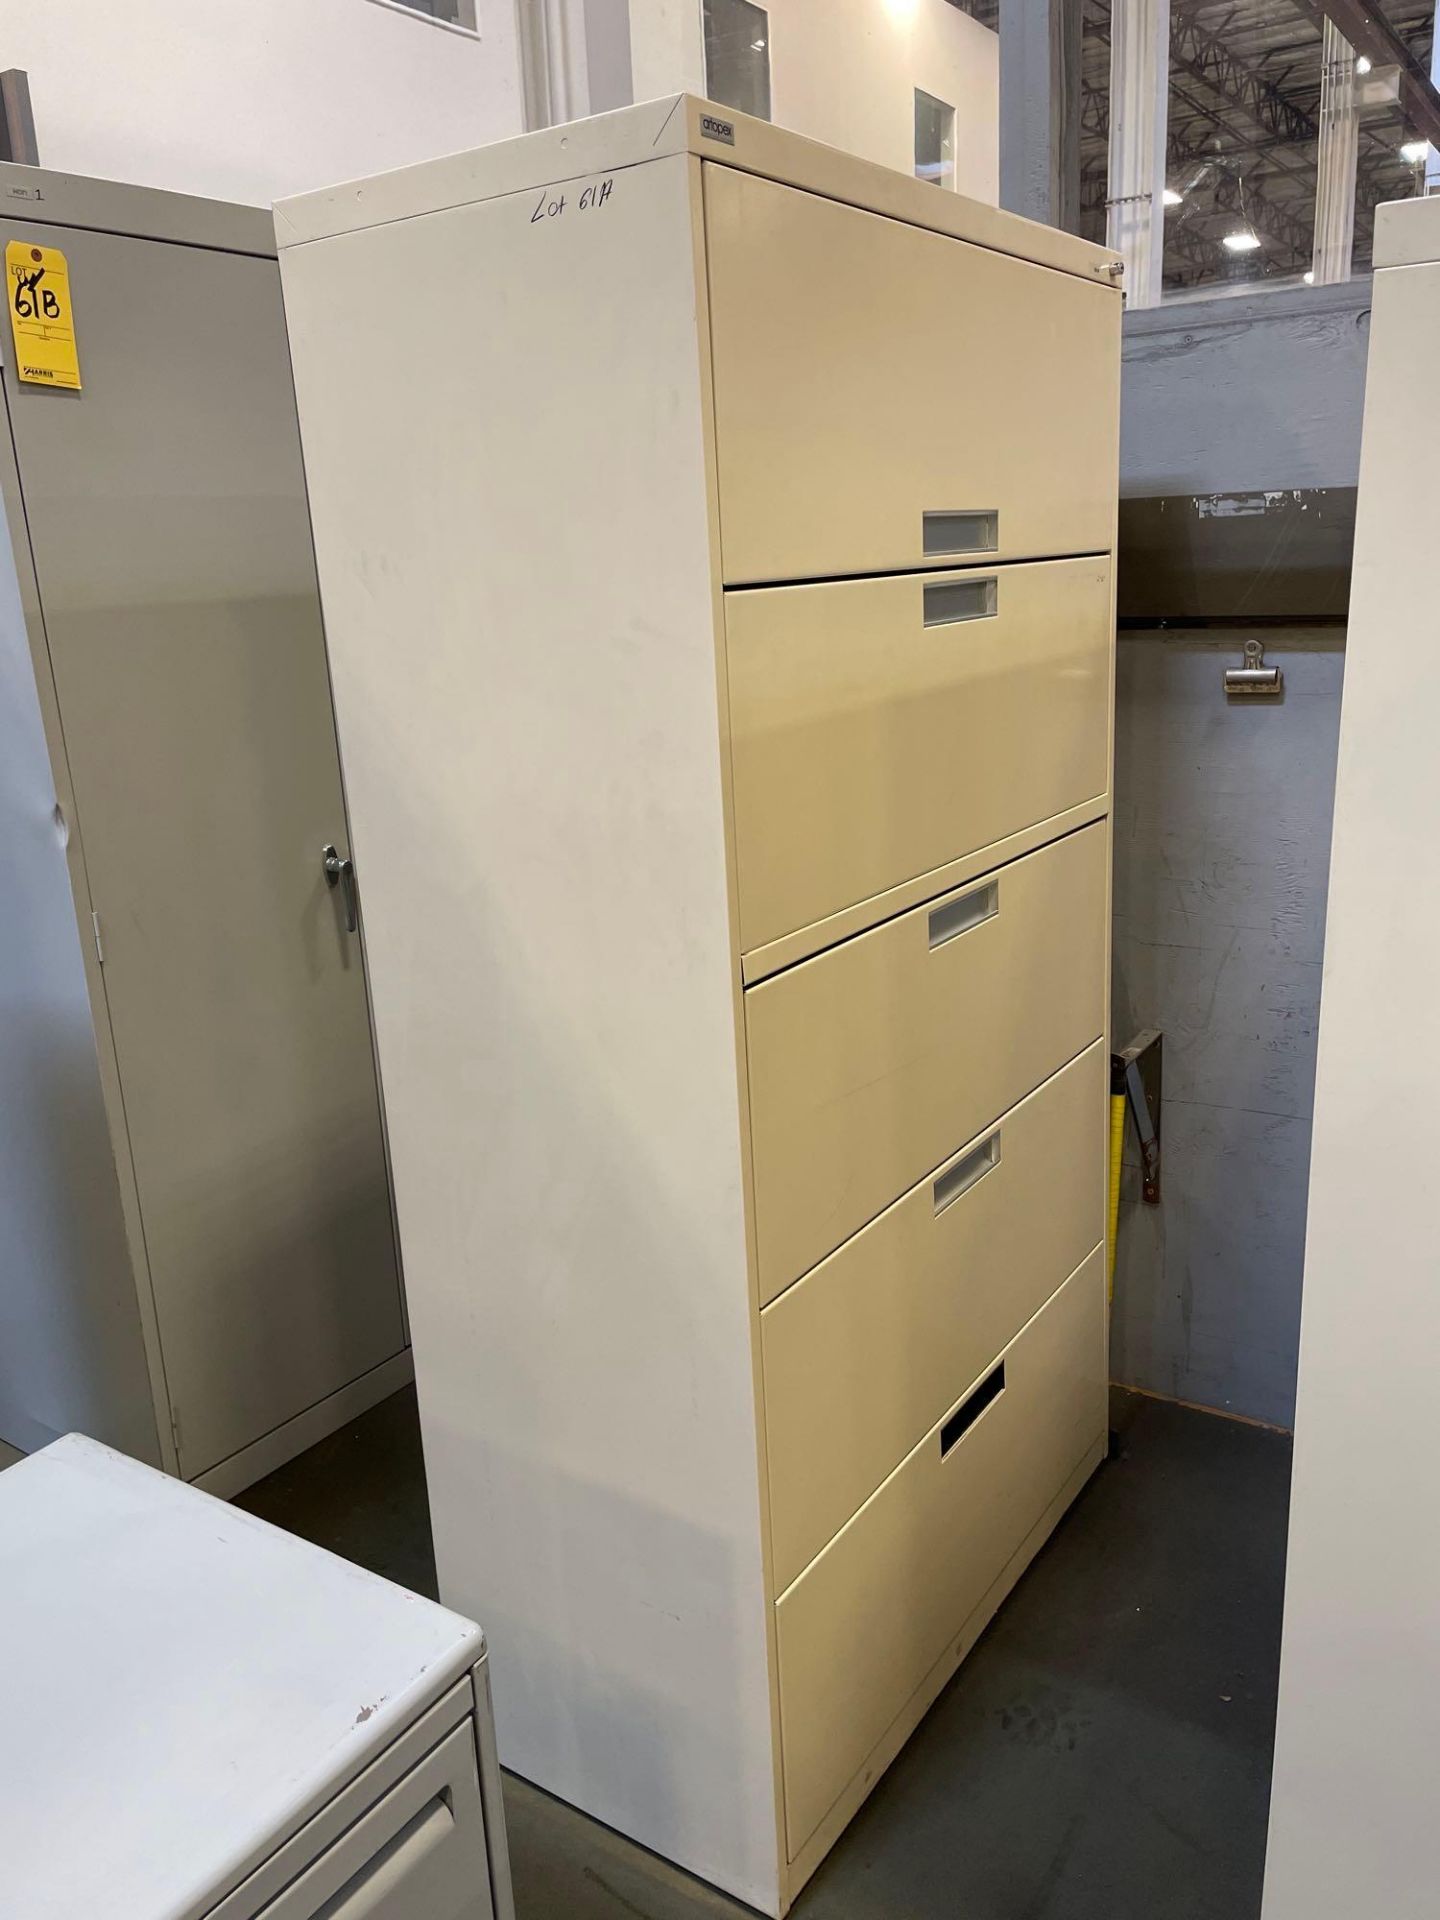 Lot of 5 File Cabinets, 5 Drawer: (4) 36" X 18" X 60", (1) 36" X 18" X 66" - Image 4 of 7